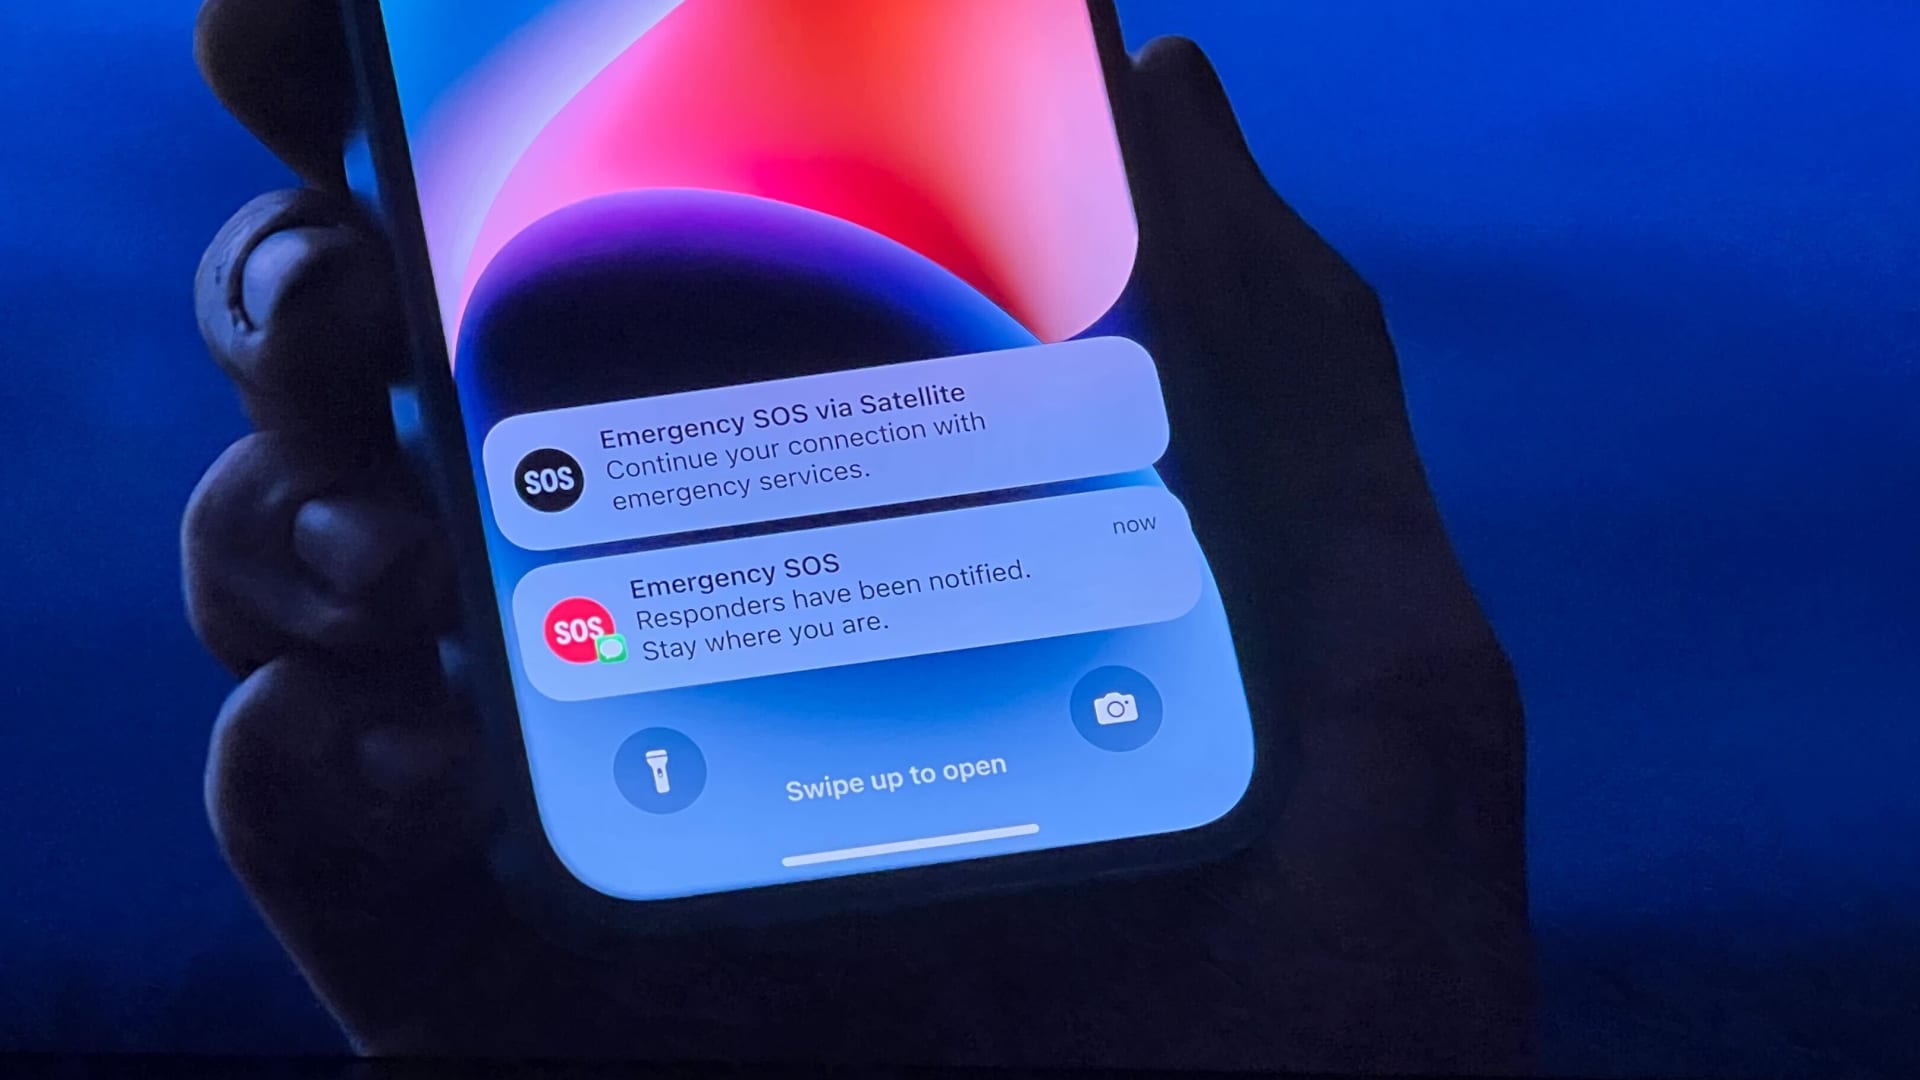 apple-event-this-year-had-an-unusually-dark-undertone-as-it-leaned-into-emergency-features